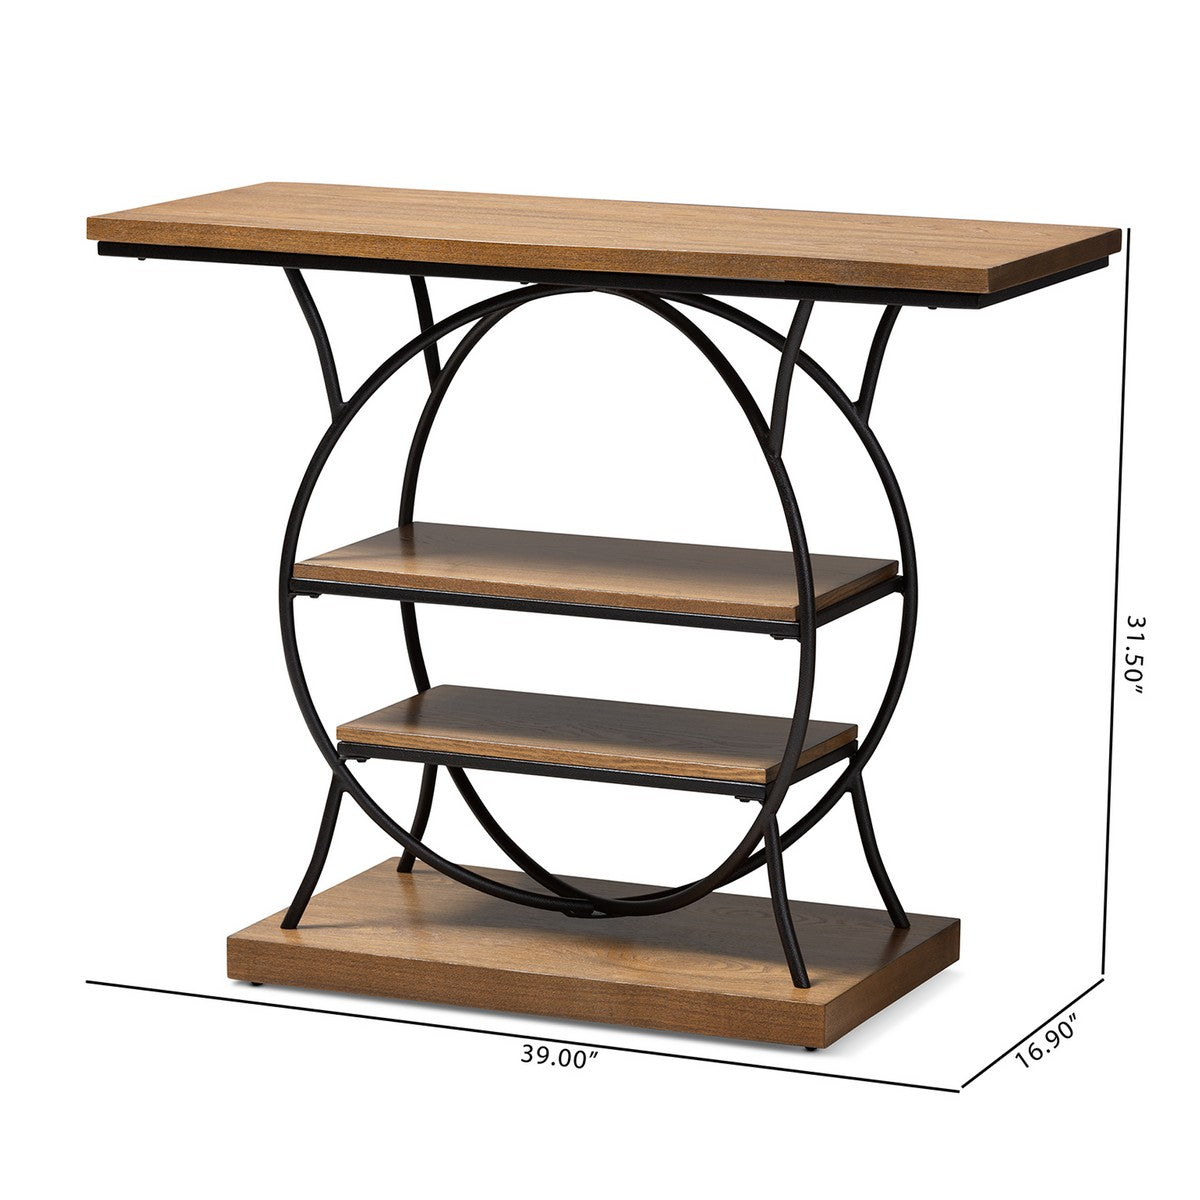 Baxton Studio Lavelle Vintage Rustic Industrial Style Walnut Brown Wood and Dark Bronze-Finished Metal Circular Console Table